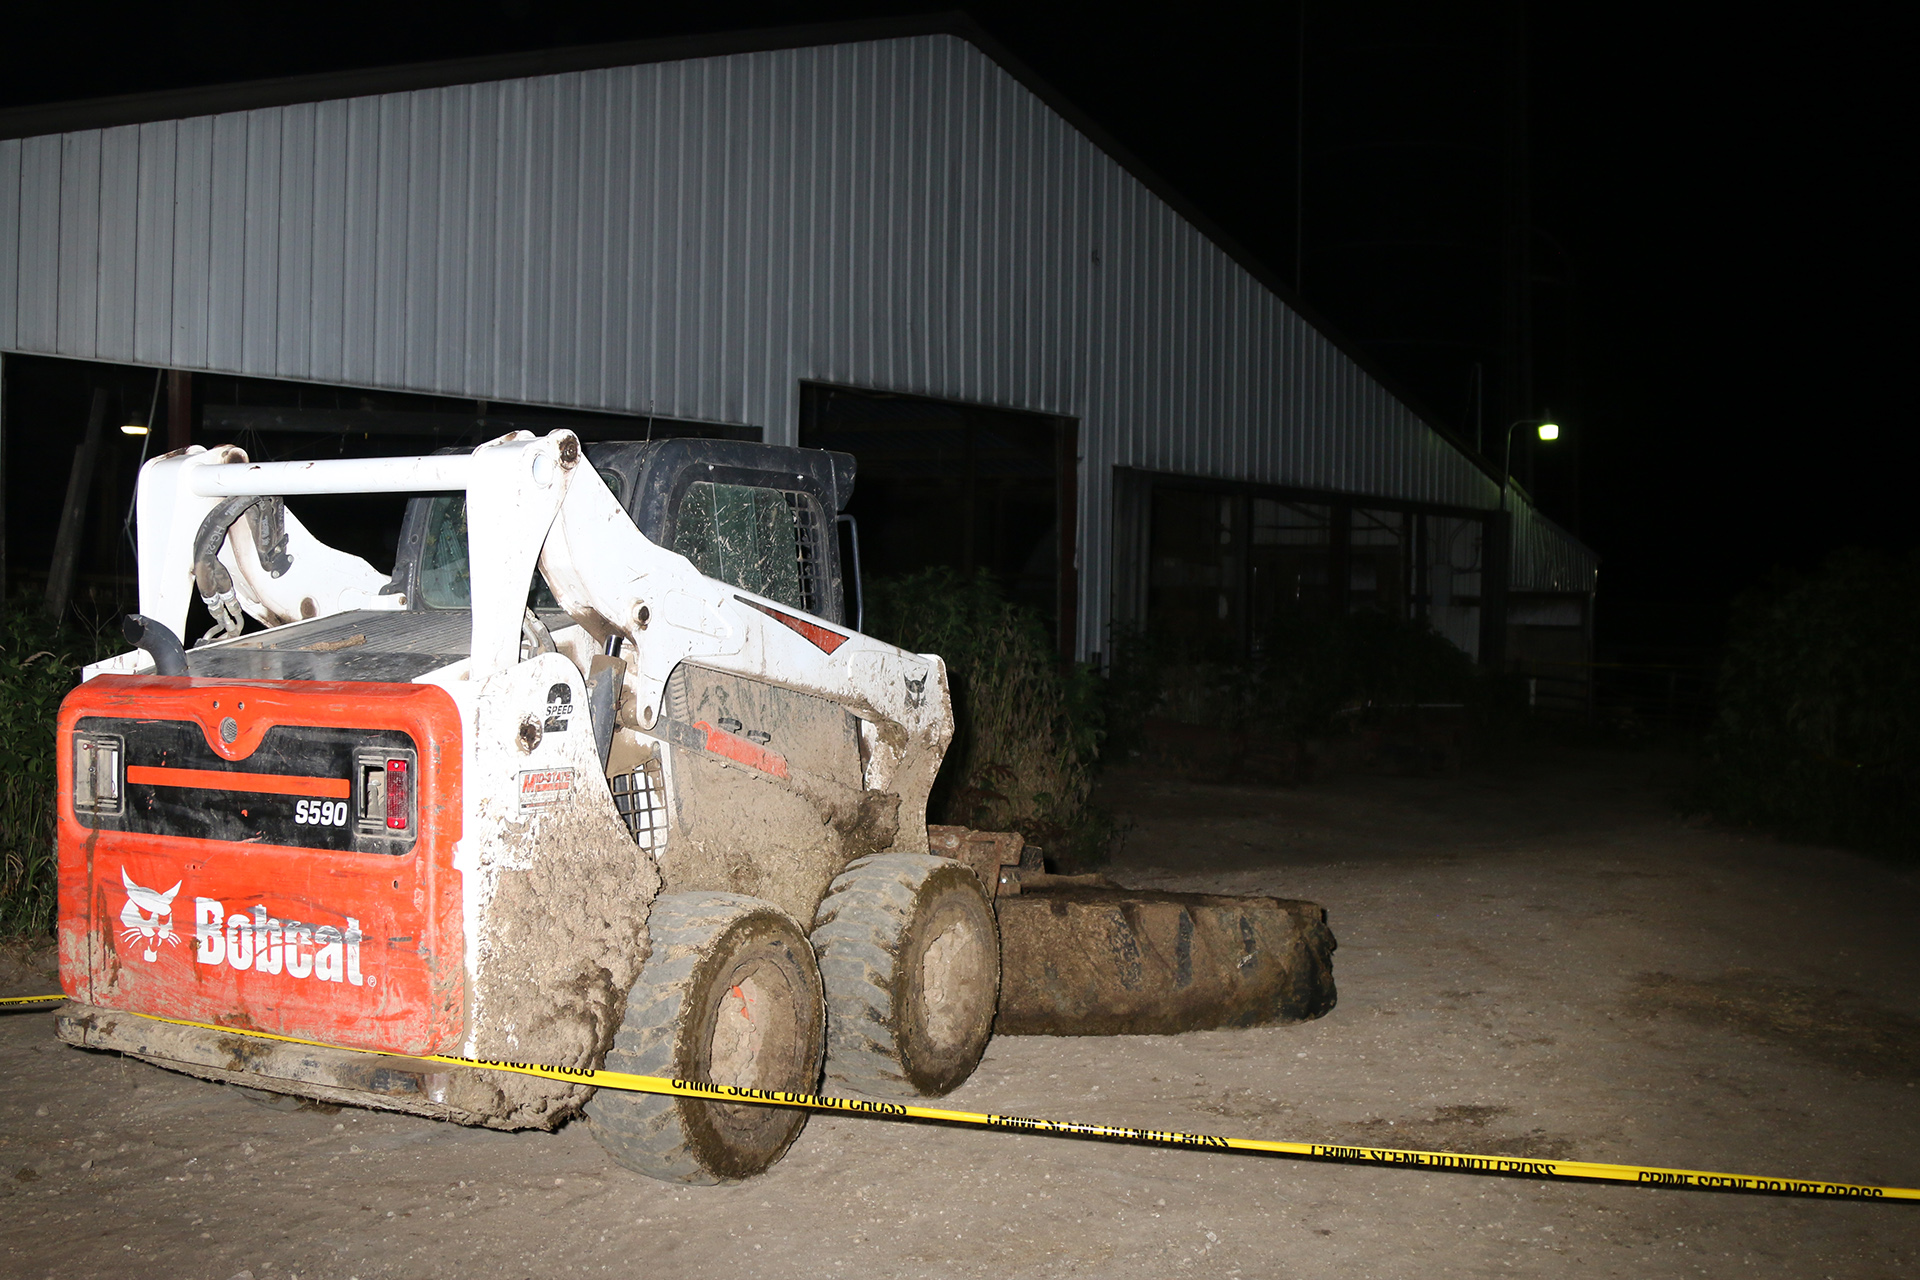 A four-wheeled agricultural vehicle with a front-mounted implement is covered in dirt and manure while parked in front of a metal-sided farm building, with barricade tape reading "Crime Scene" and "Do Not Cross" in the foreground.